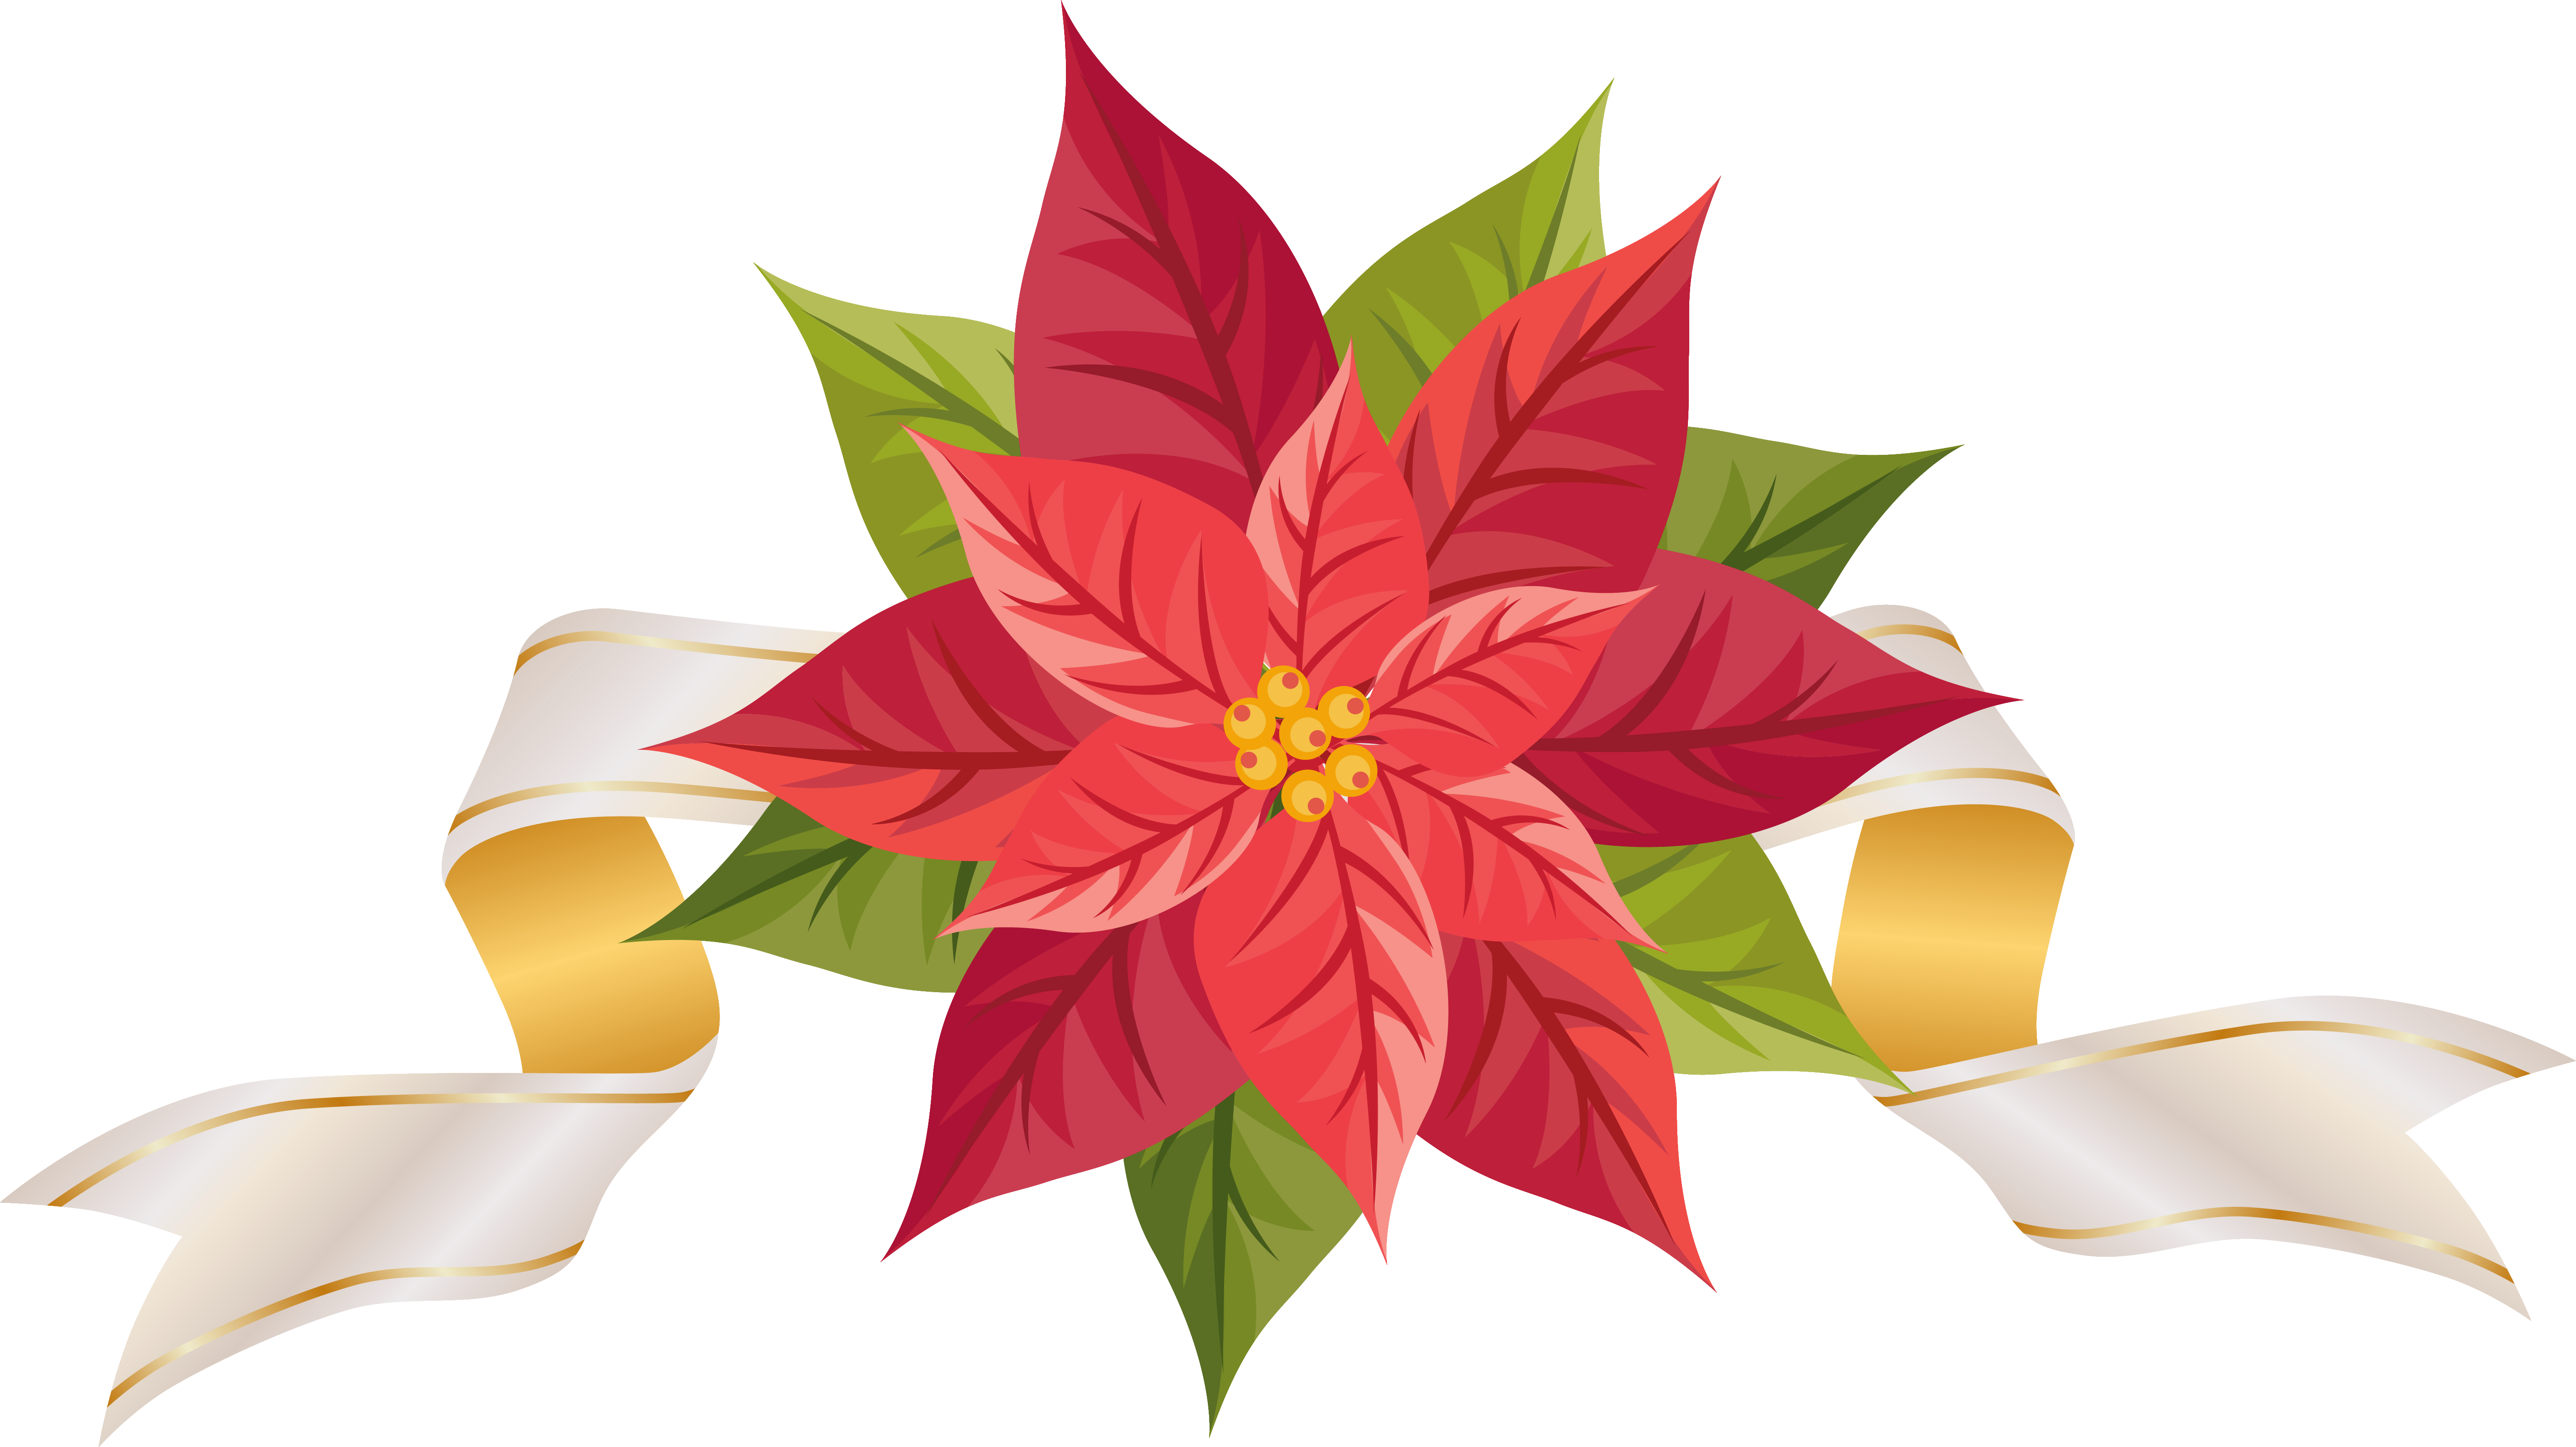 With ribbon png image. Poinsettia clipart cute